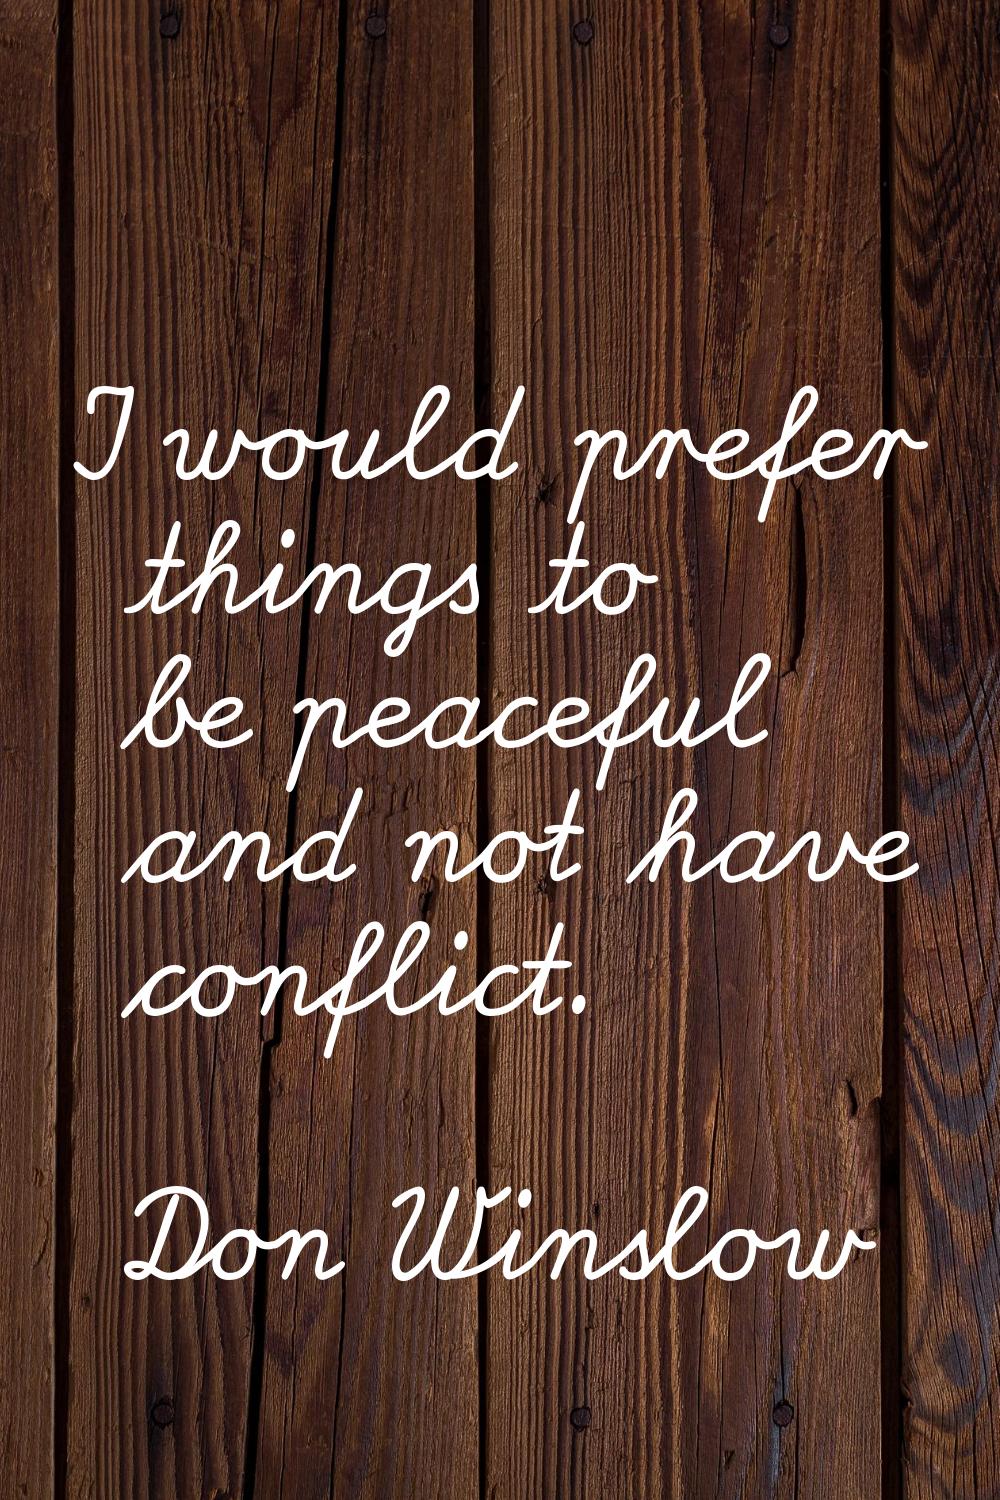 I would prefer things to be peaceful and not have conflict.